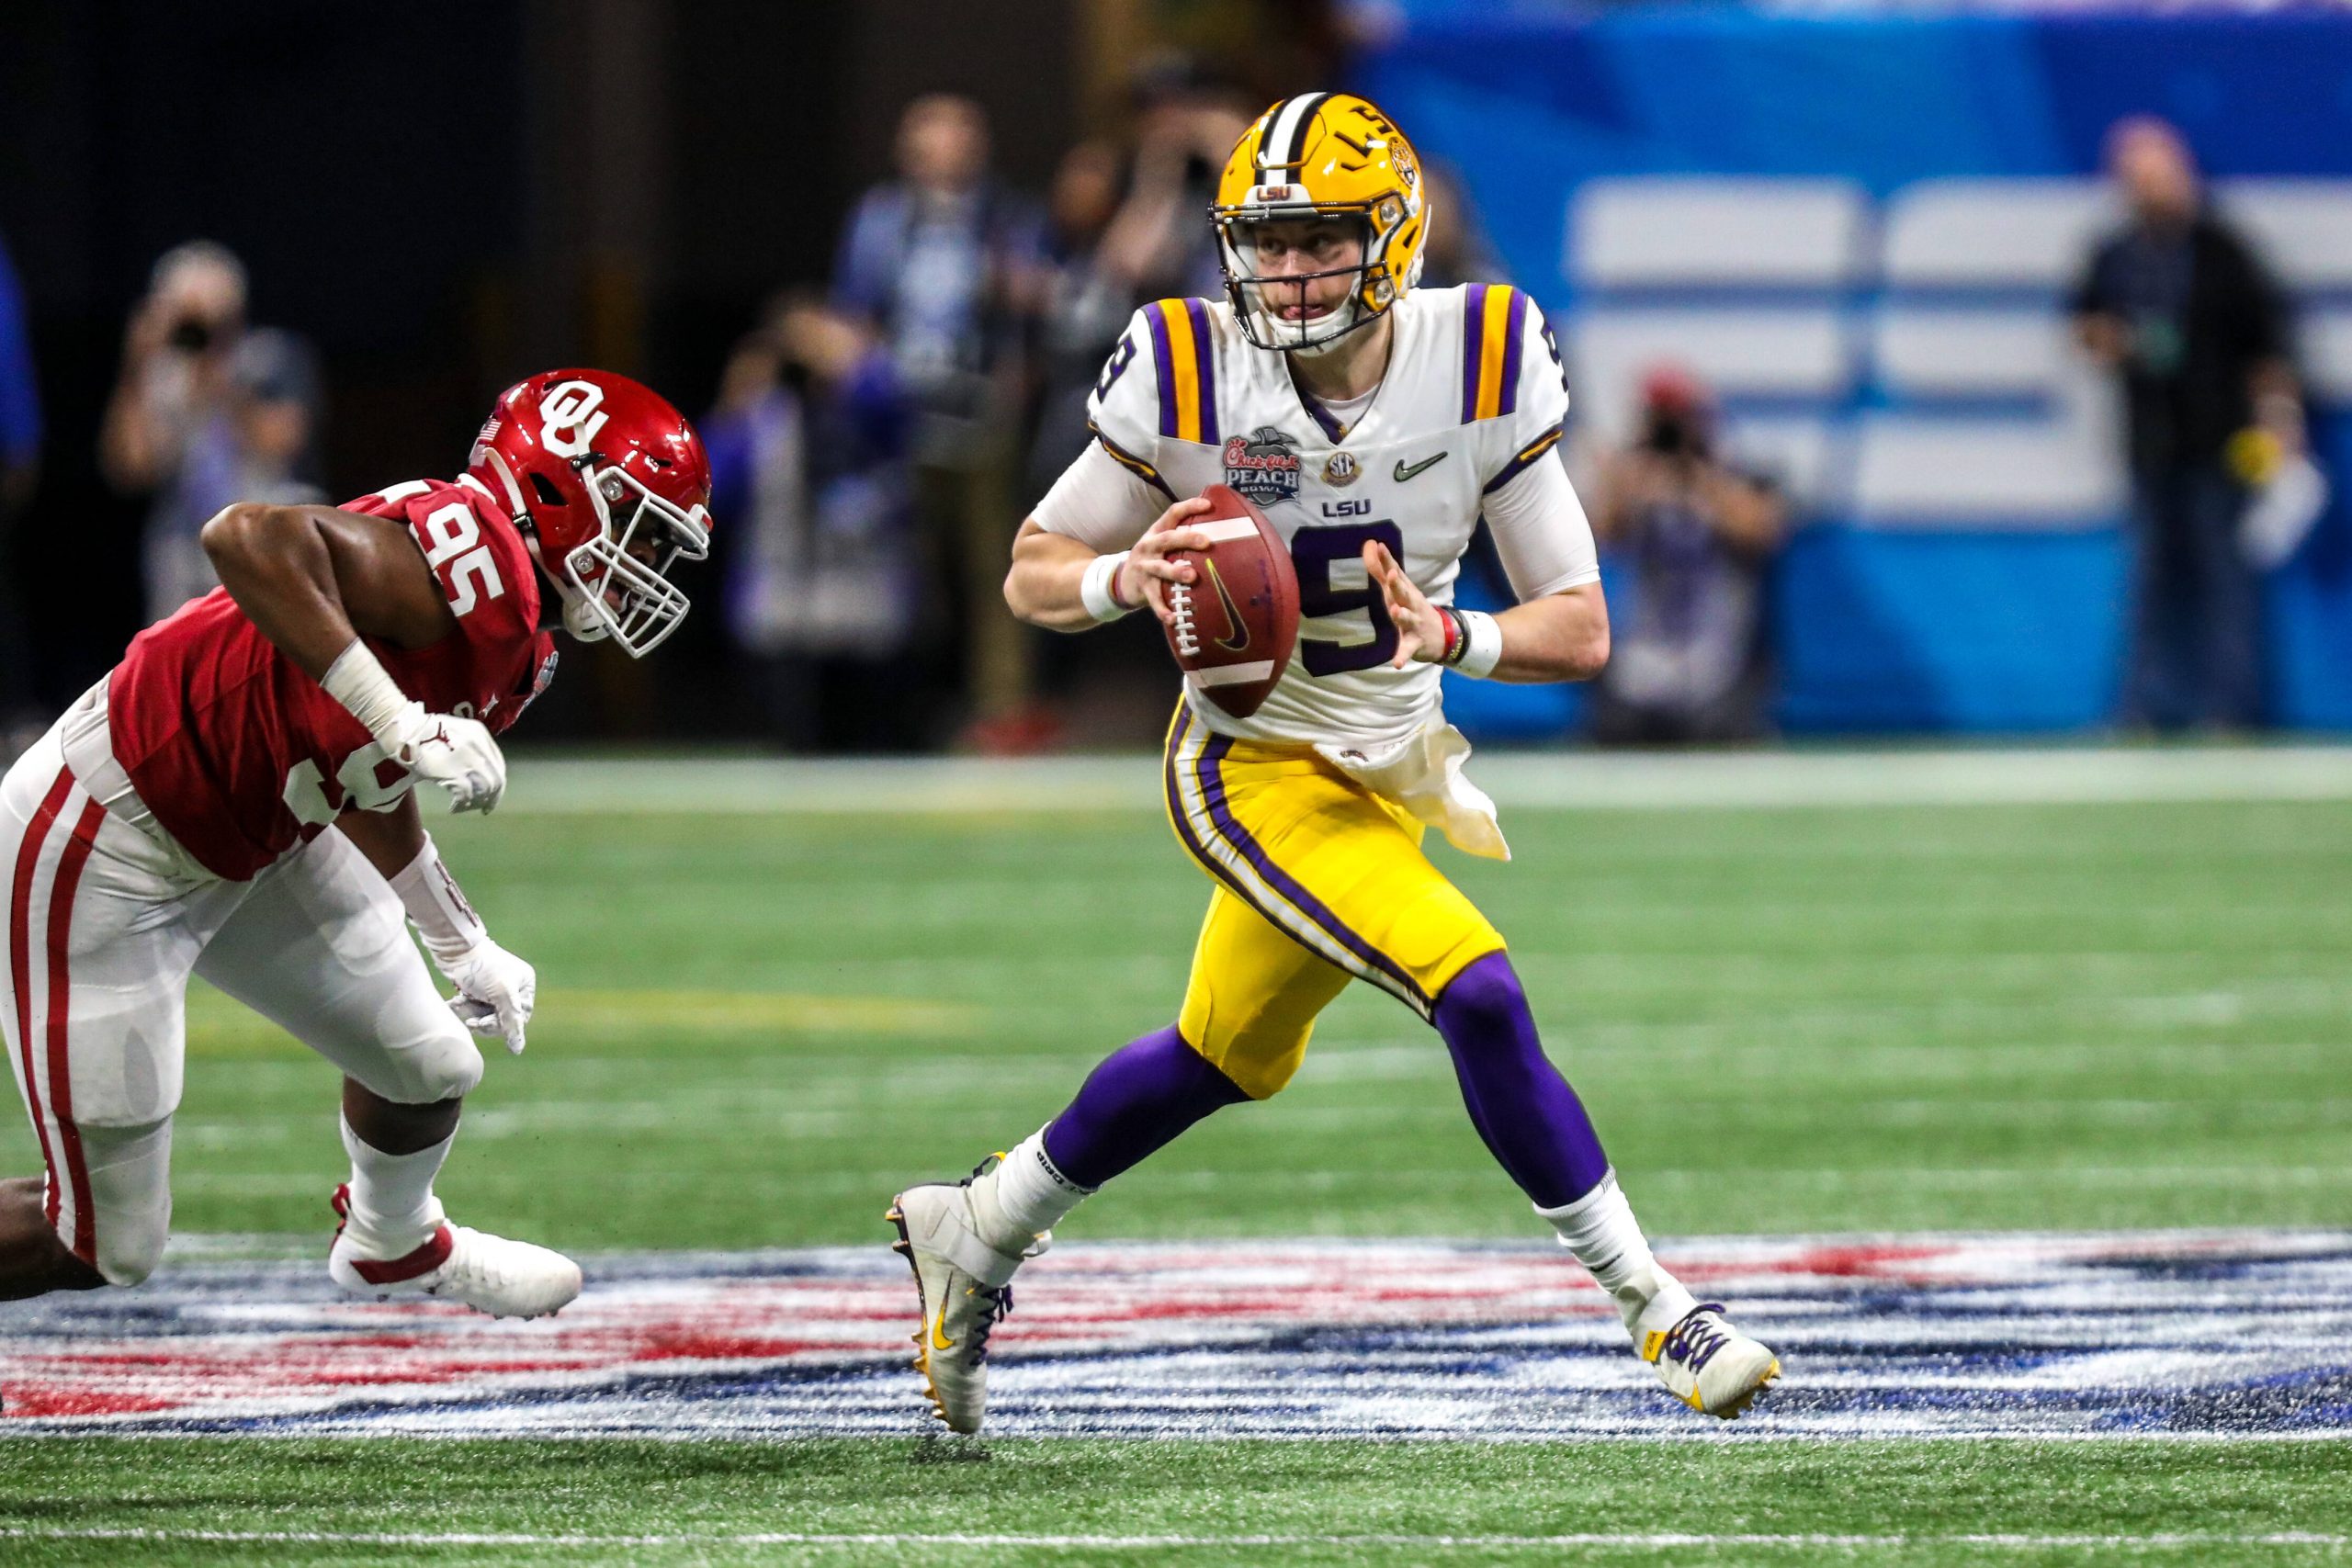 LSU s Joe Burrow 9 scrambles during the Chick-Fil-A Peach Bowl - a College Football Playoff Nationall Semifinal - featuring the Oklahoma Sooners and the LSU Tigers, played at Mercedes Benz Stadium in Atlanta, Georgia. /CSM NCAA, College League, USA Football 2019